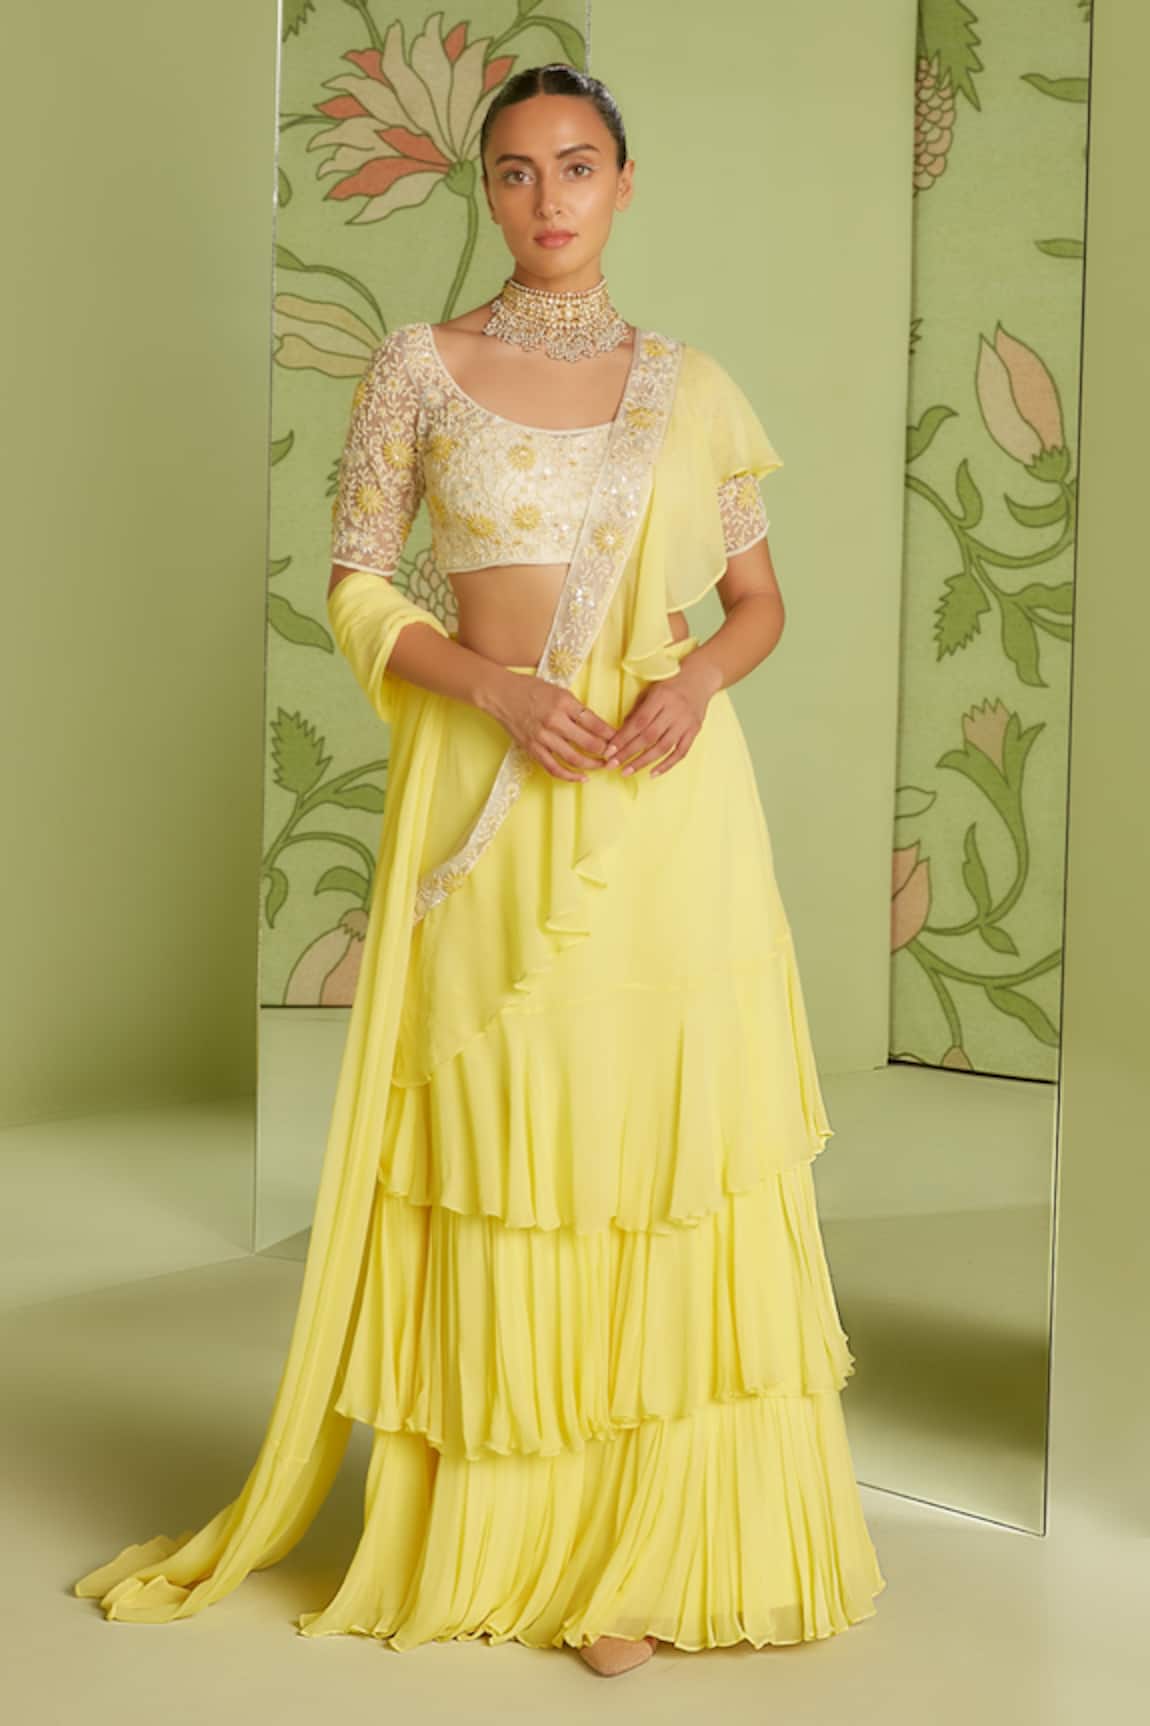 Gowns for Women - Party Wear Gown Designs Online for Girls